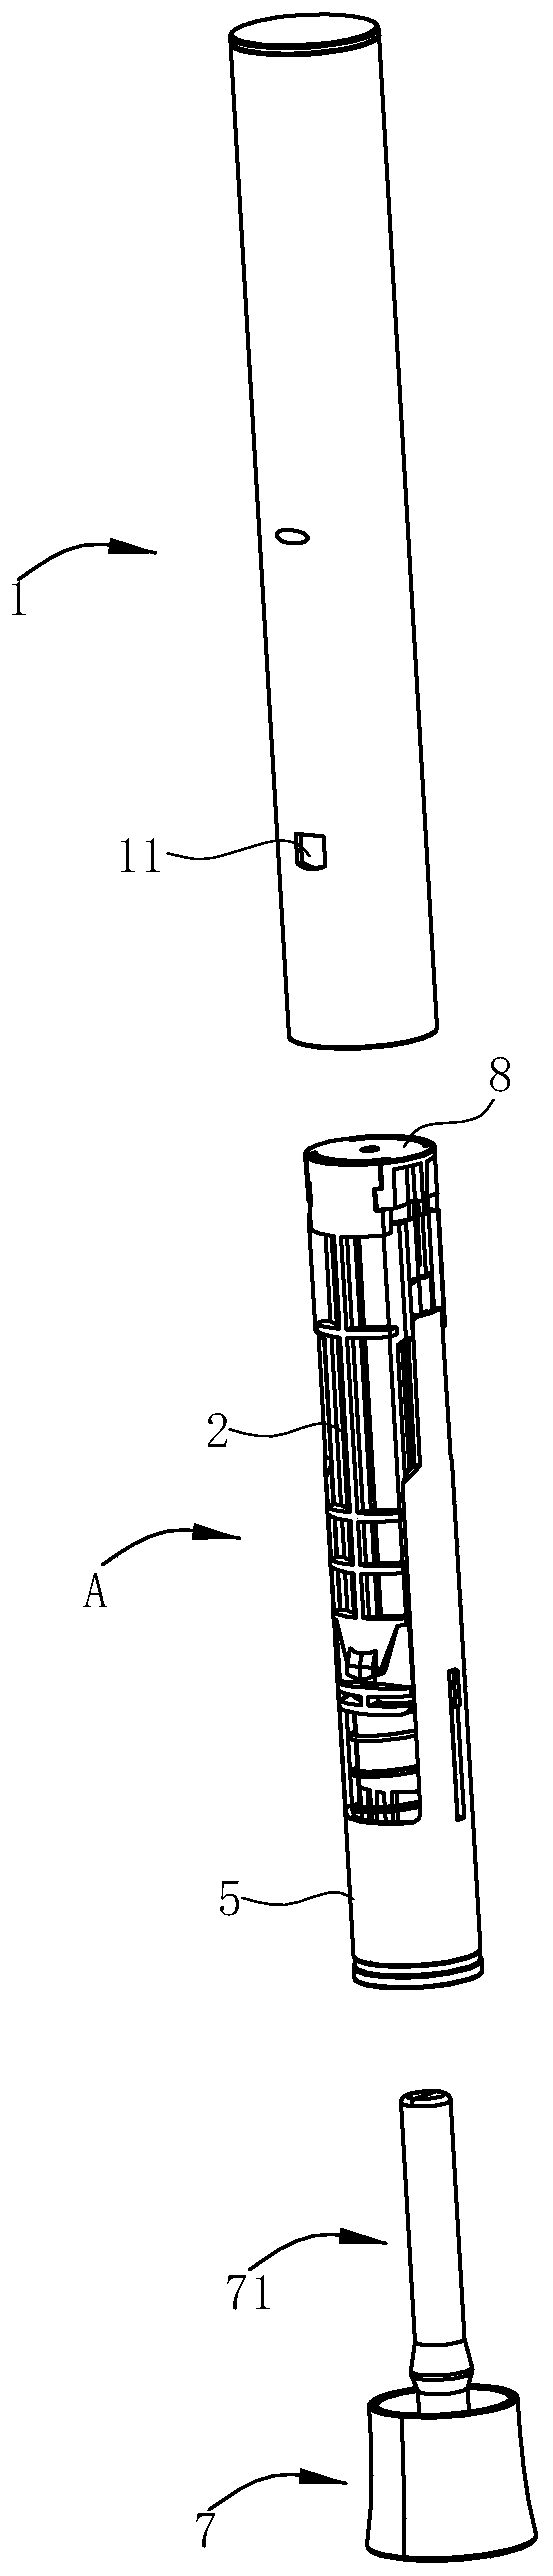 Injection training device with sound prompting function